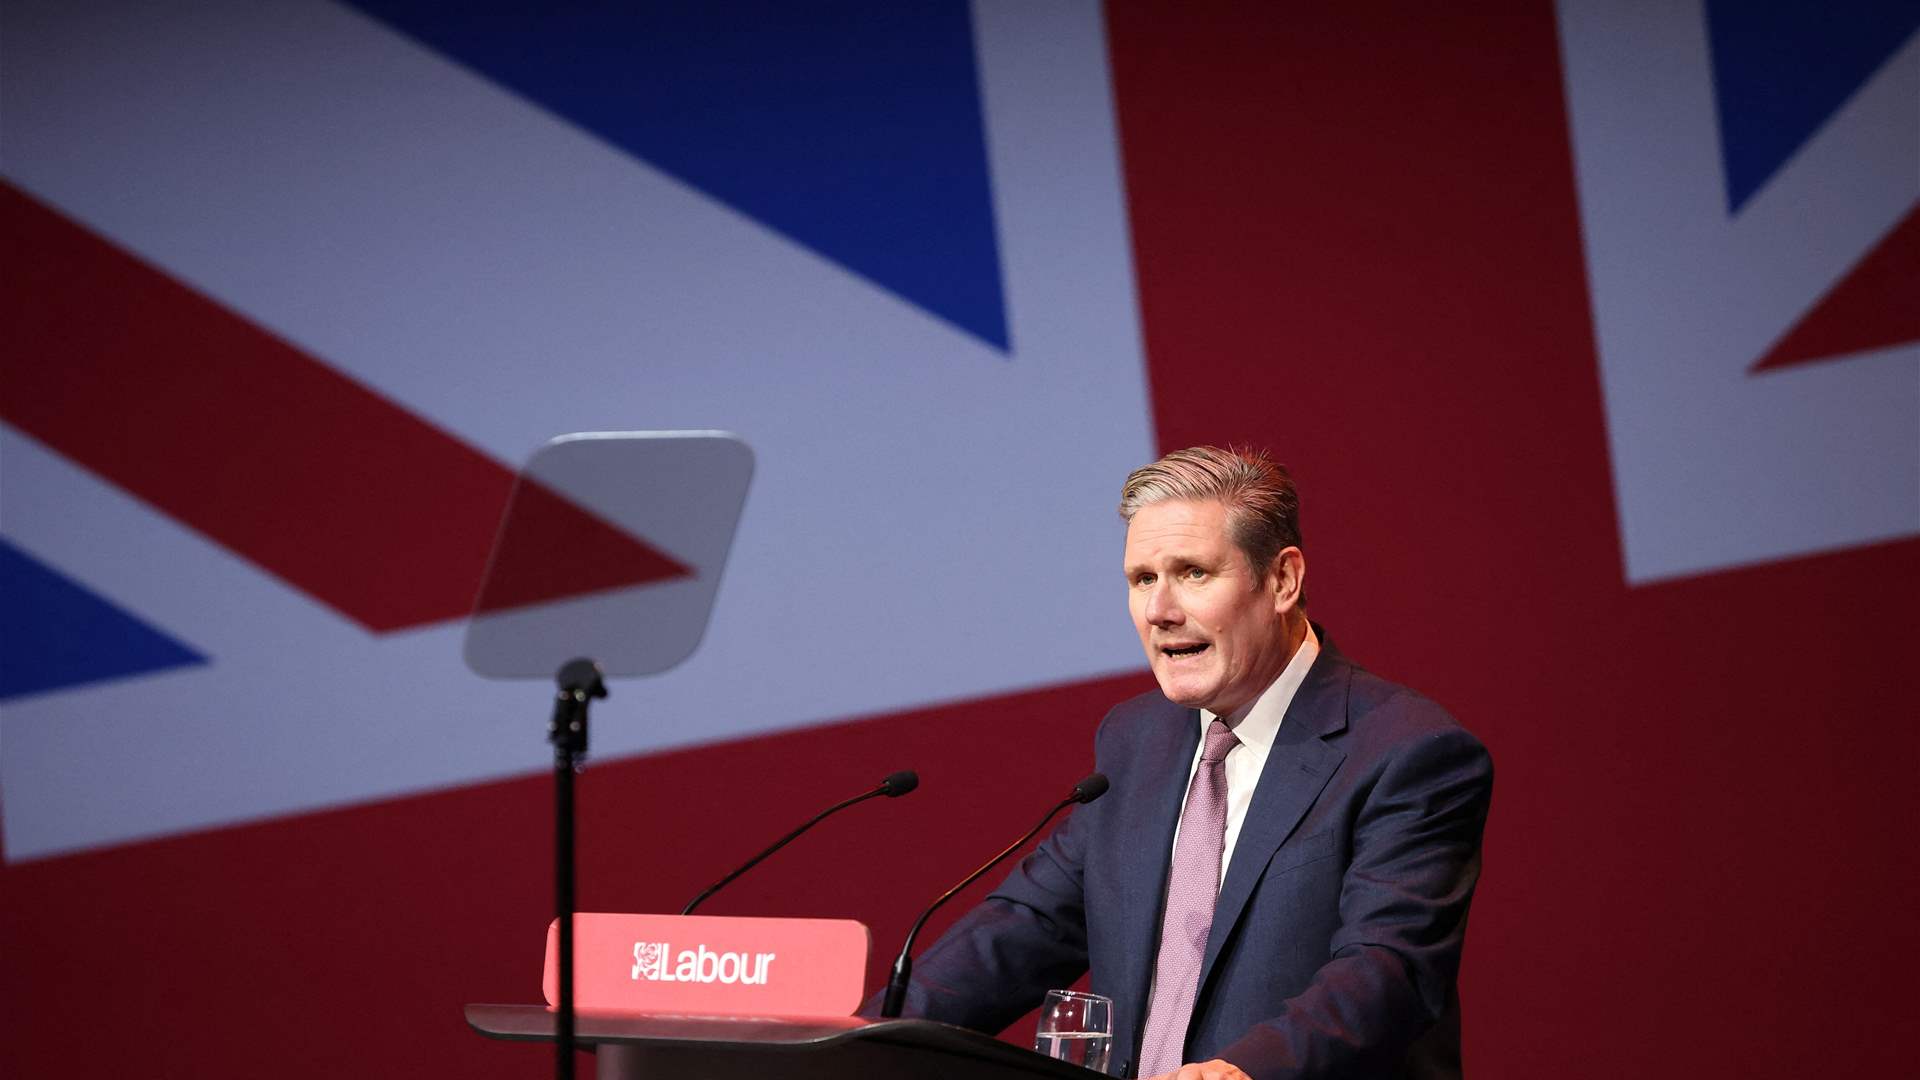 UK&#39;s Starmer vows to &#39;renew bonds of trust and friendship&#39; with Europe